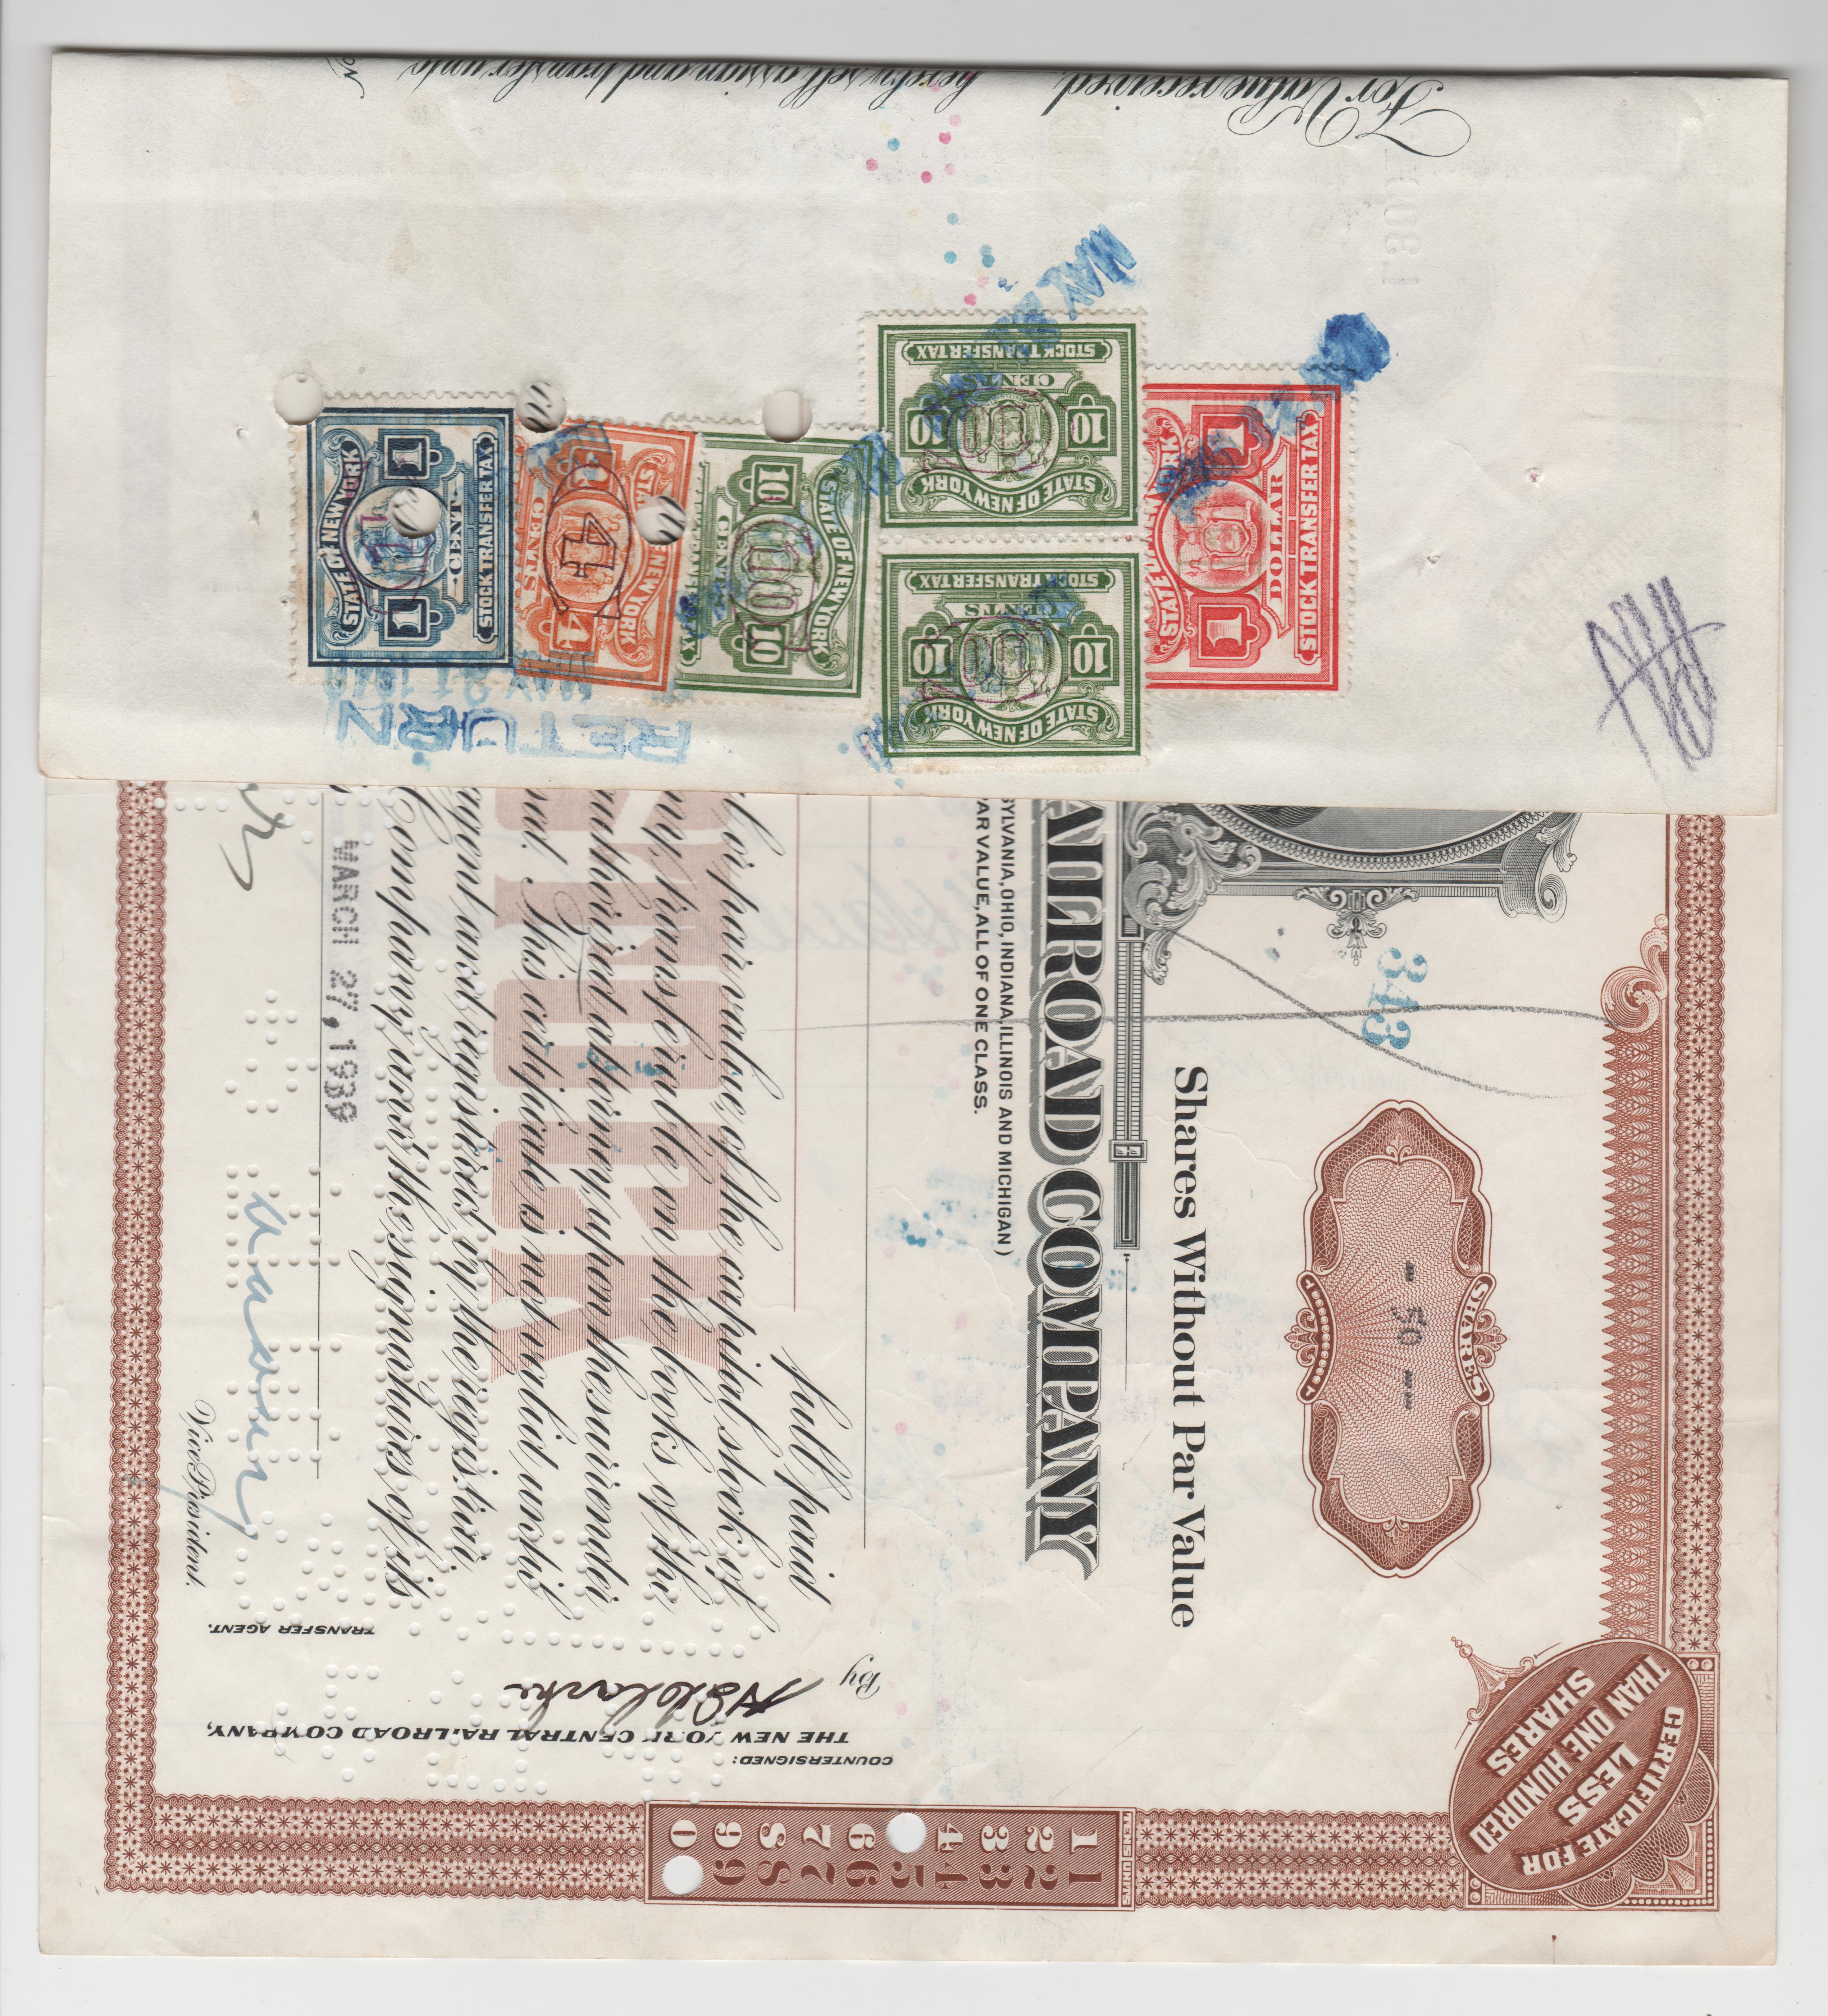 NY stock transfer $1.35 in stamps canceled May 21 1940 attached to NYC RR stock certificate, some punched. WP